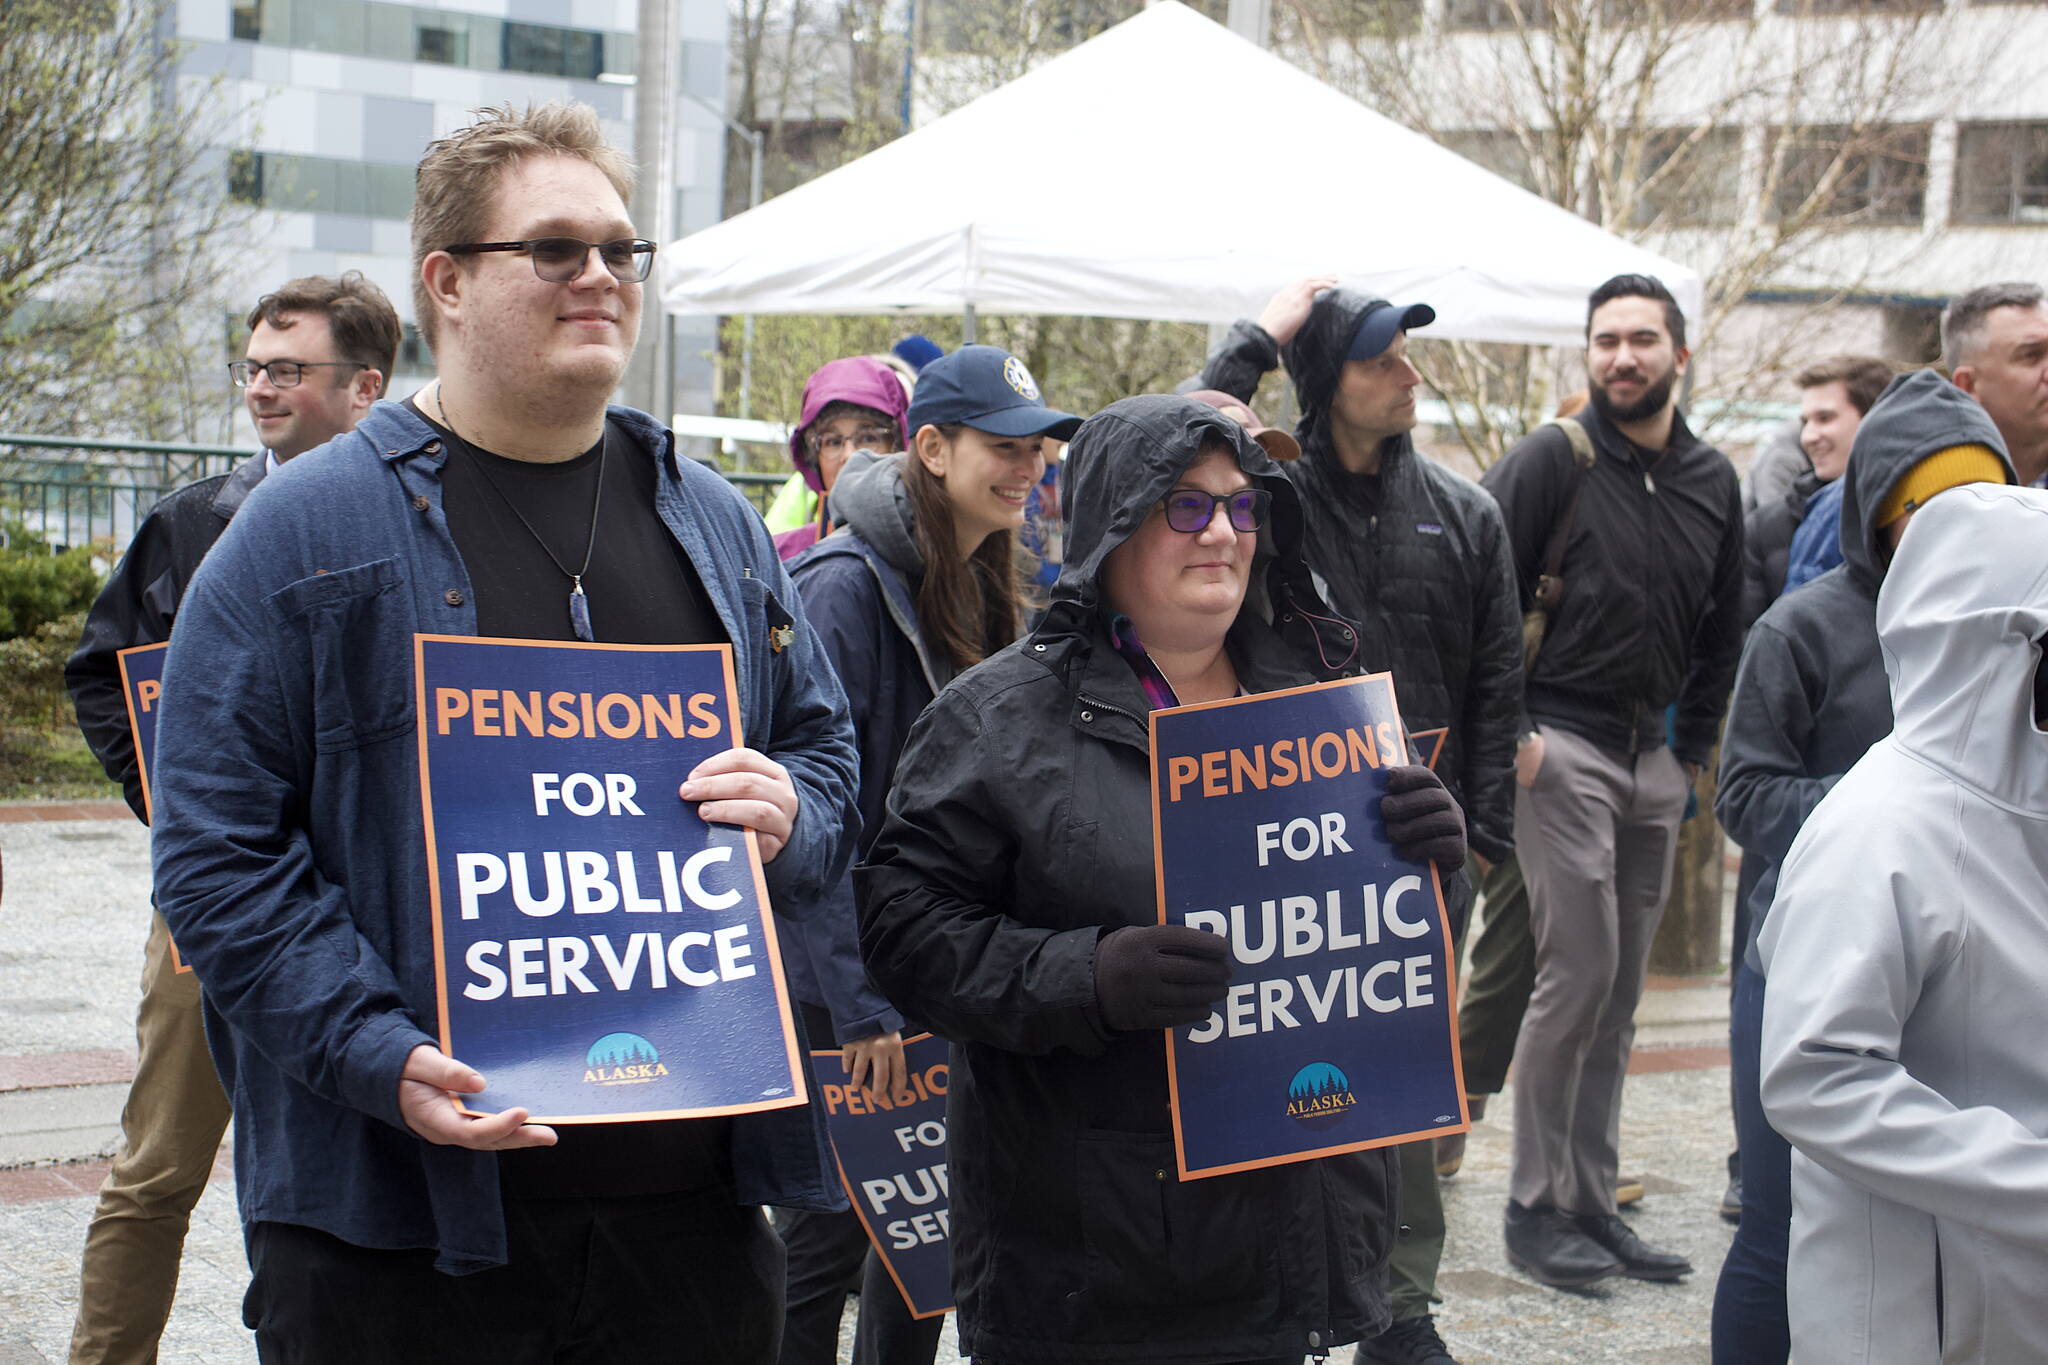 Supporters of a bill returning pensions for state employees to a fixed-benefits system used until 2006 instead of the 401K-style system that followed gather in the rain in front of the Alaska State Capitol during a rally Tuesday evening. (Mark Sabbatini / Juneau Empire)